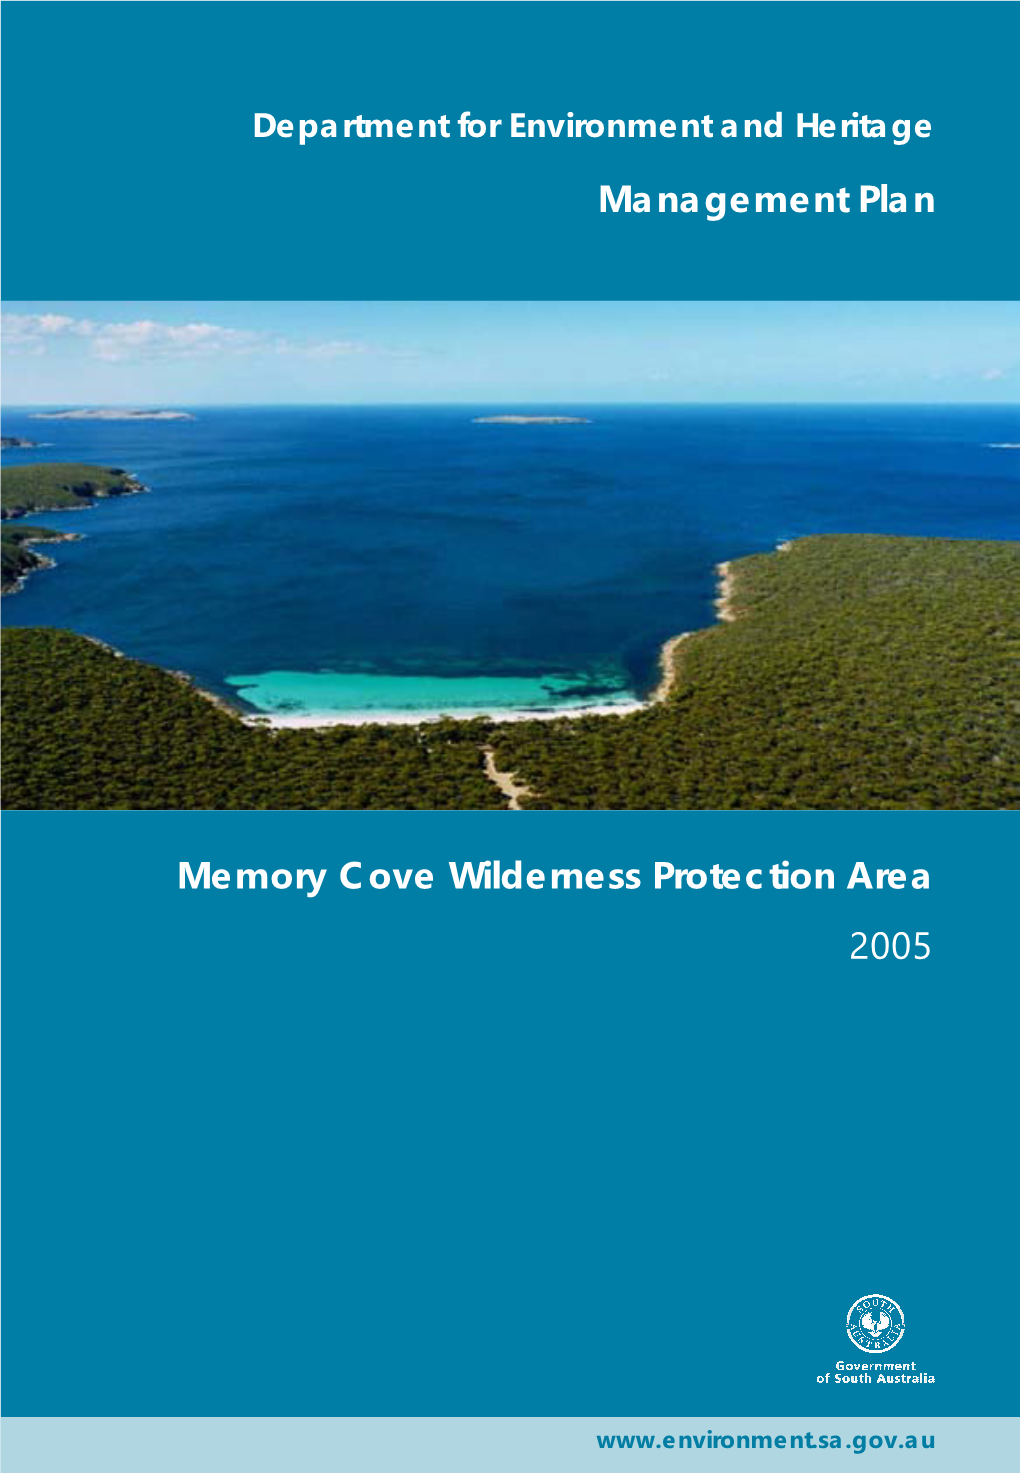 Memory Cove Wilderness Protection Area Management Plan